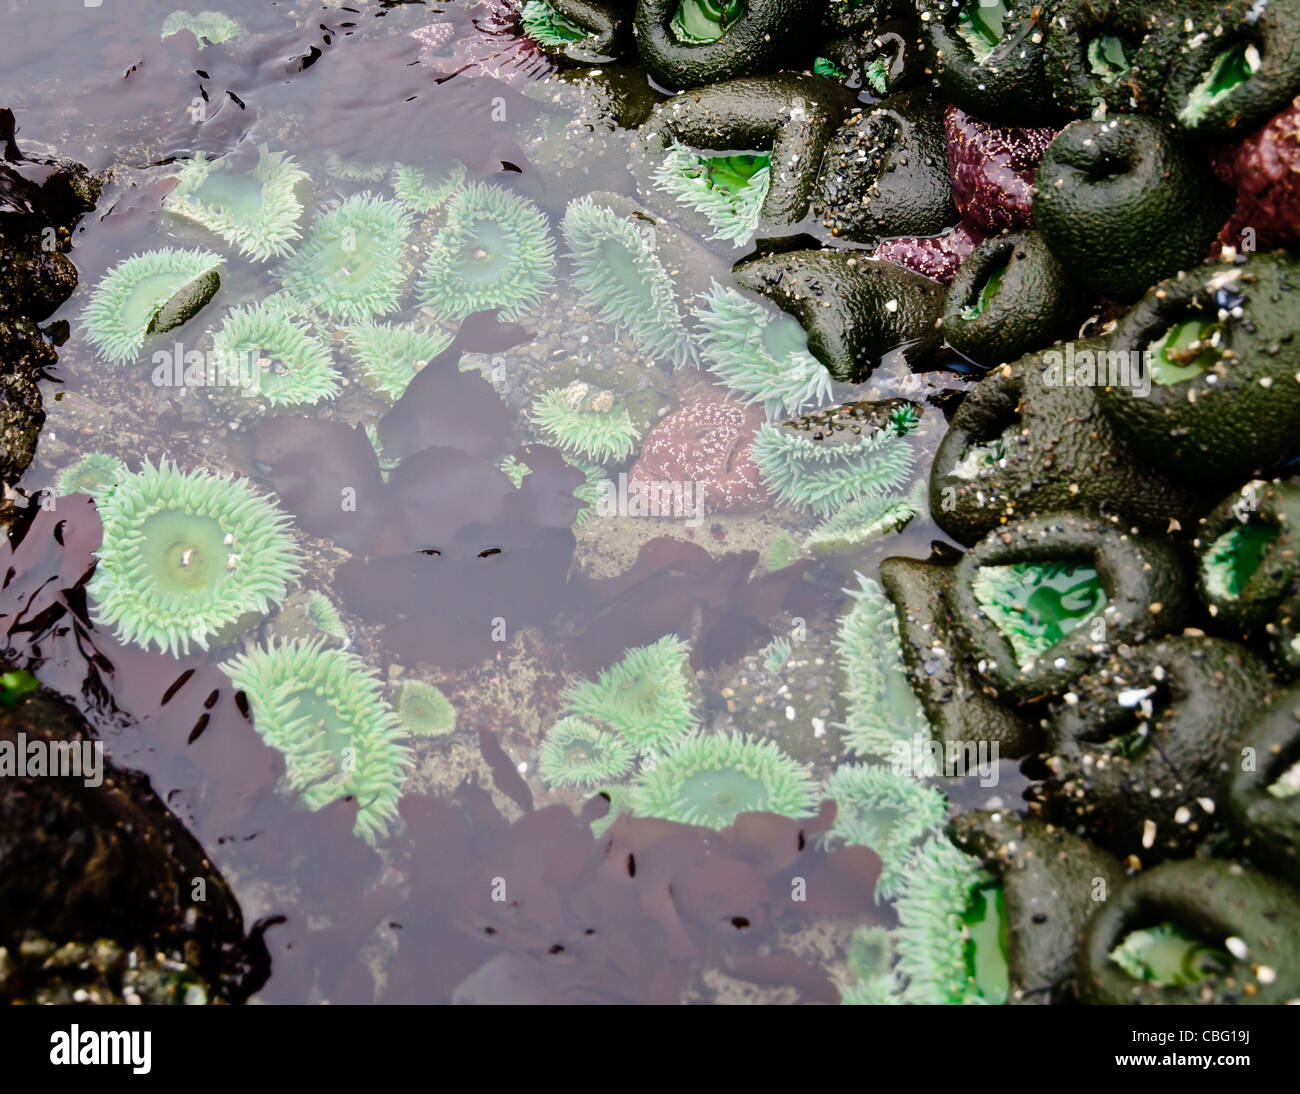 Green sea anemones and kelp in a tide pool on the beach at low tide in Olympic National Park, USA Stock Photo